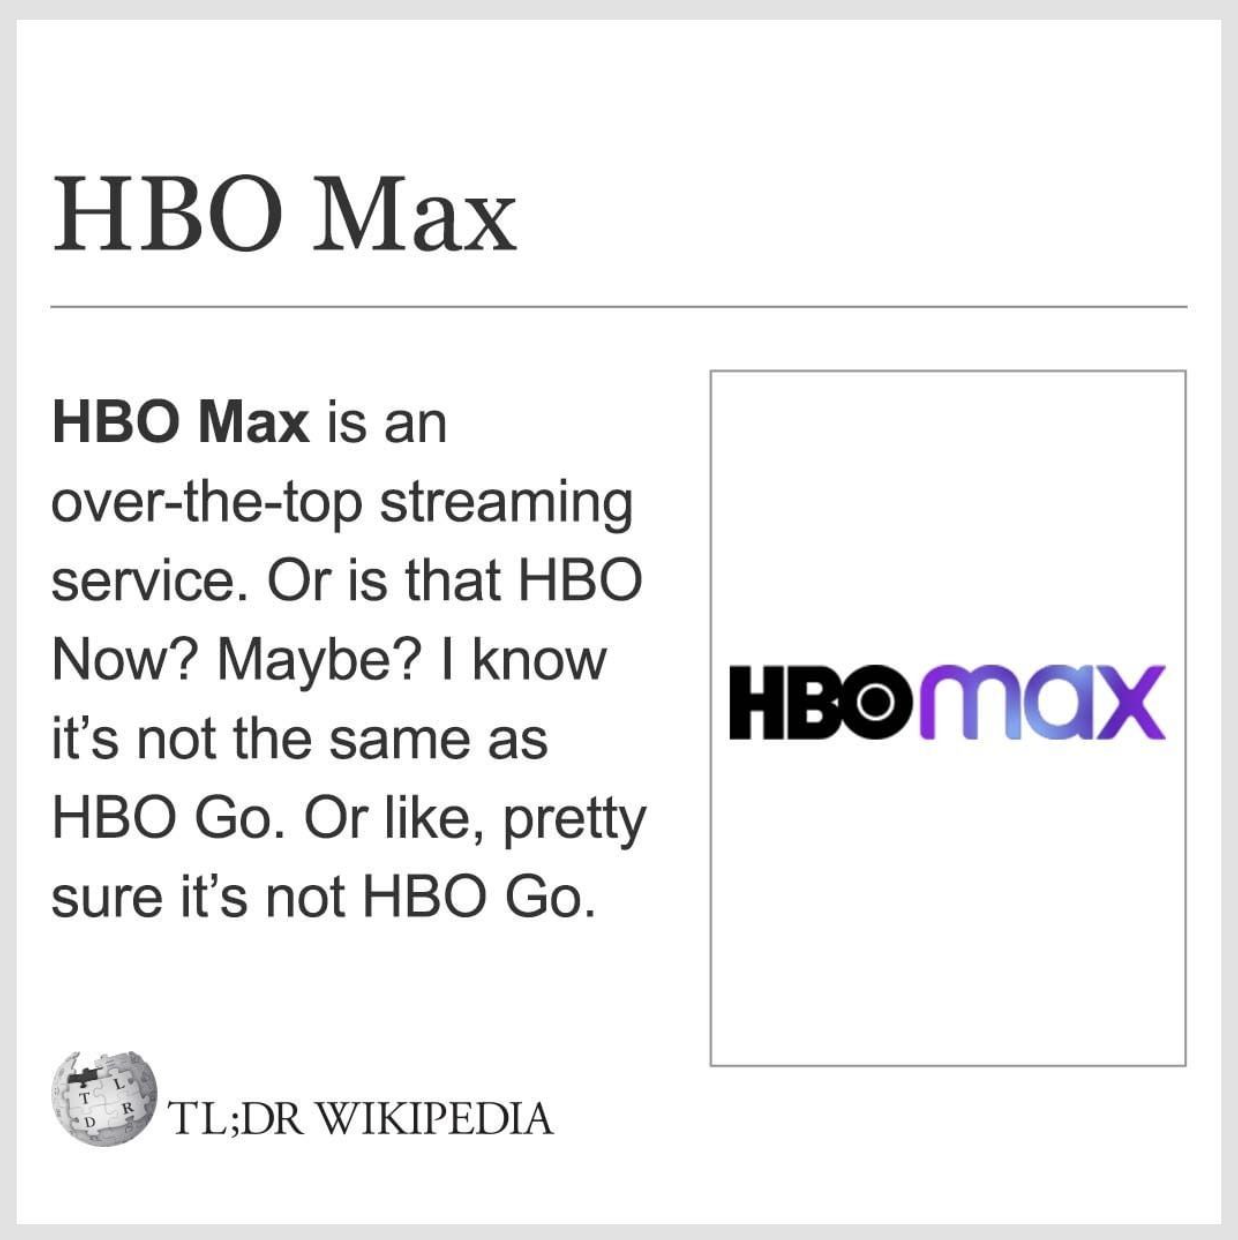 Wikipedia Memes - hbo max - Hbo Max Hbo Max is an overthetop streaming service. Or is that Hbo Now? Maybe? I know it's not the same as Hbo Go. Or , pretty sure it's not Hbo Go. Hbo max Tl;Dr Wikipedia